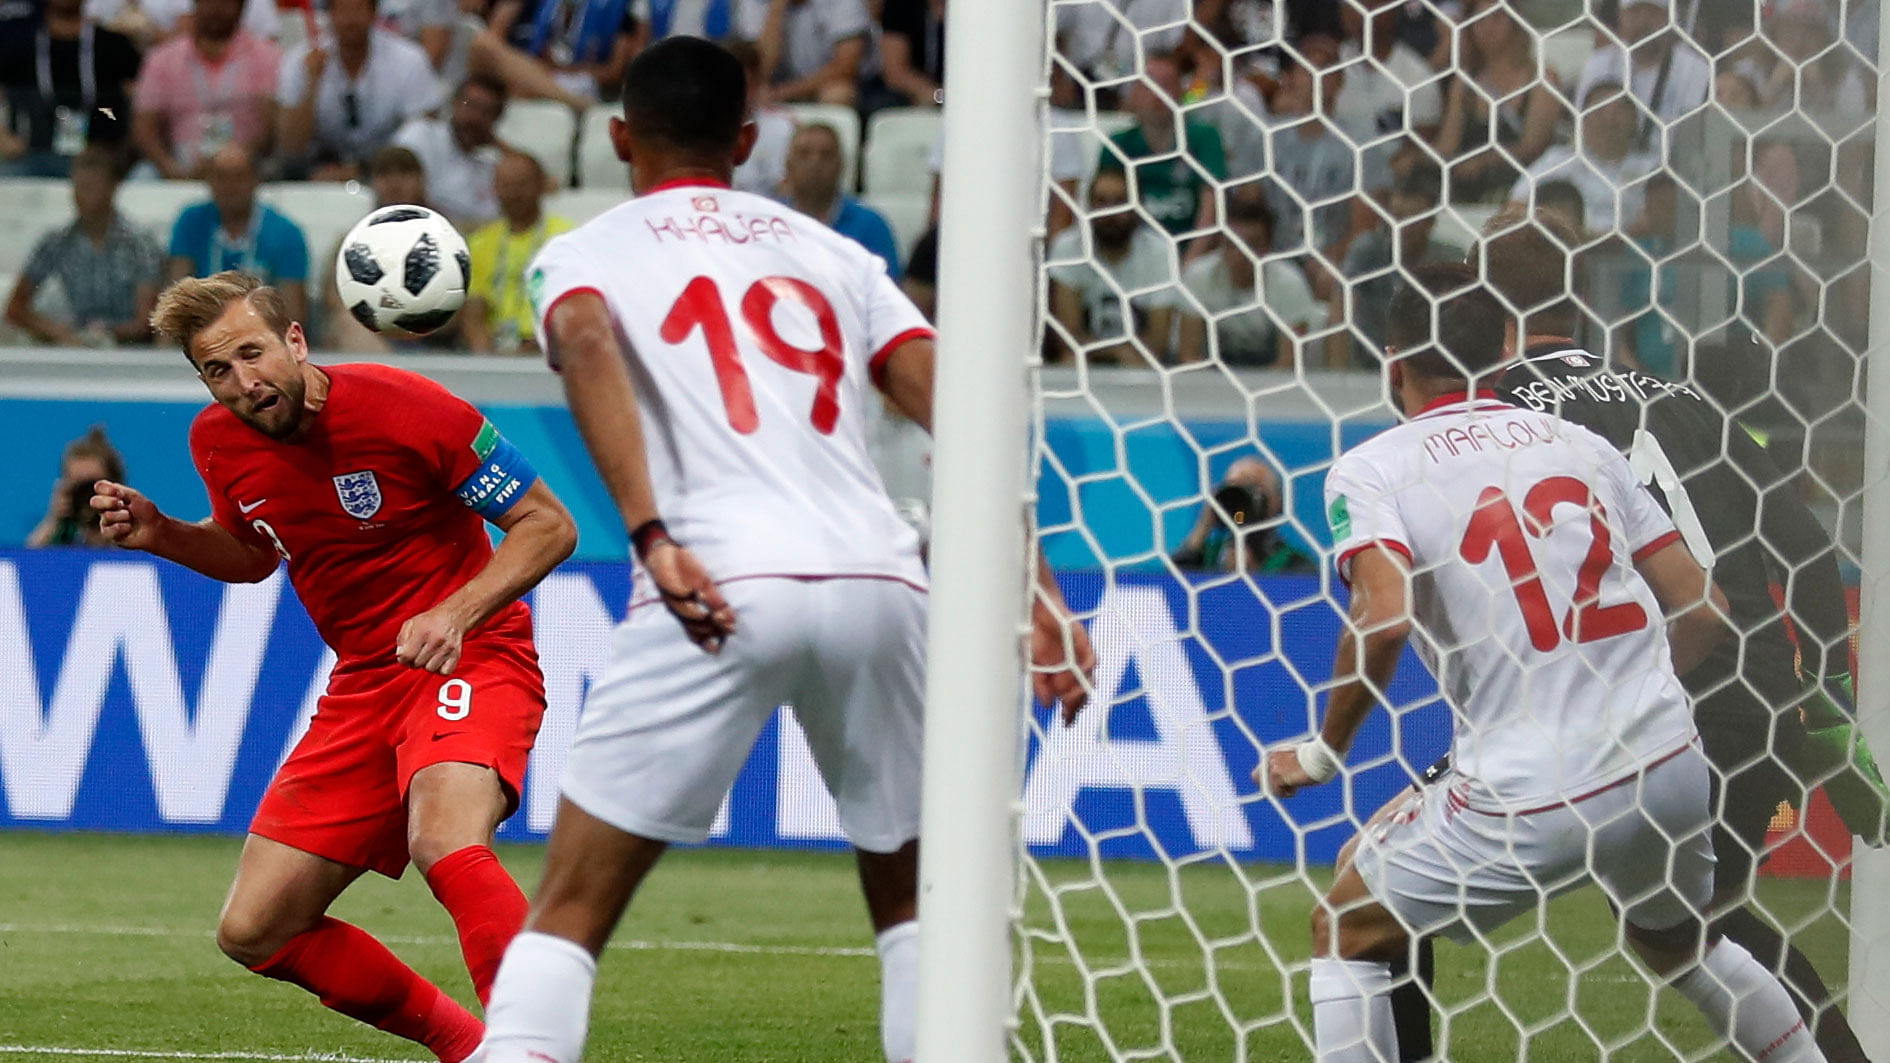 Harry Kane led England to a dramatic 2-1 win over Tunisia in their World Cup opener.